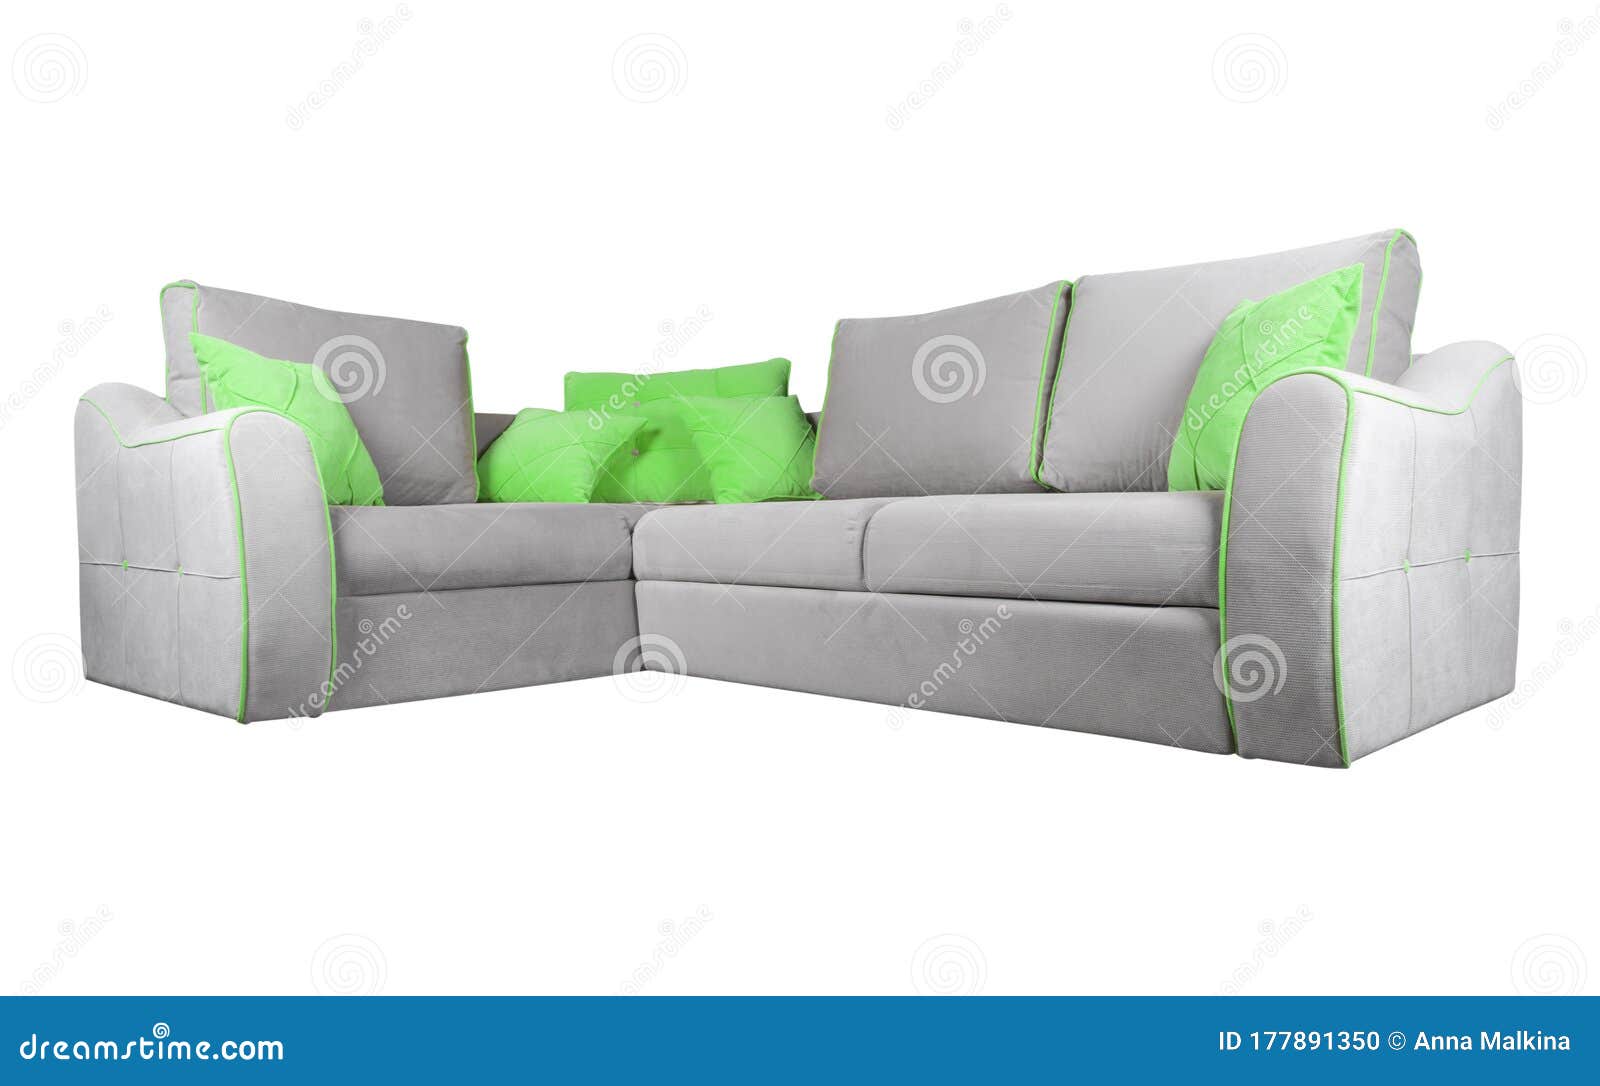 green and gray pillows